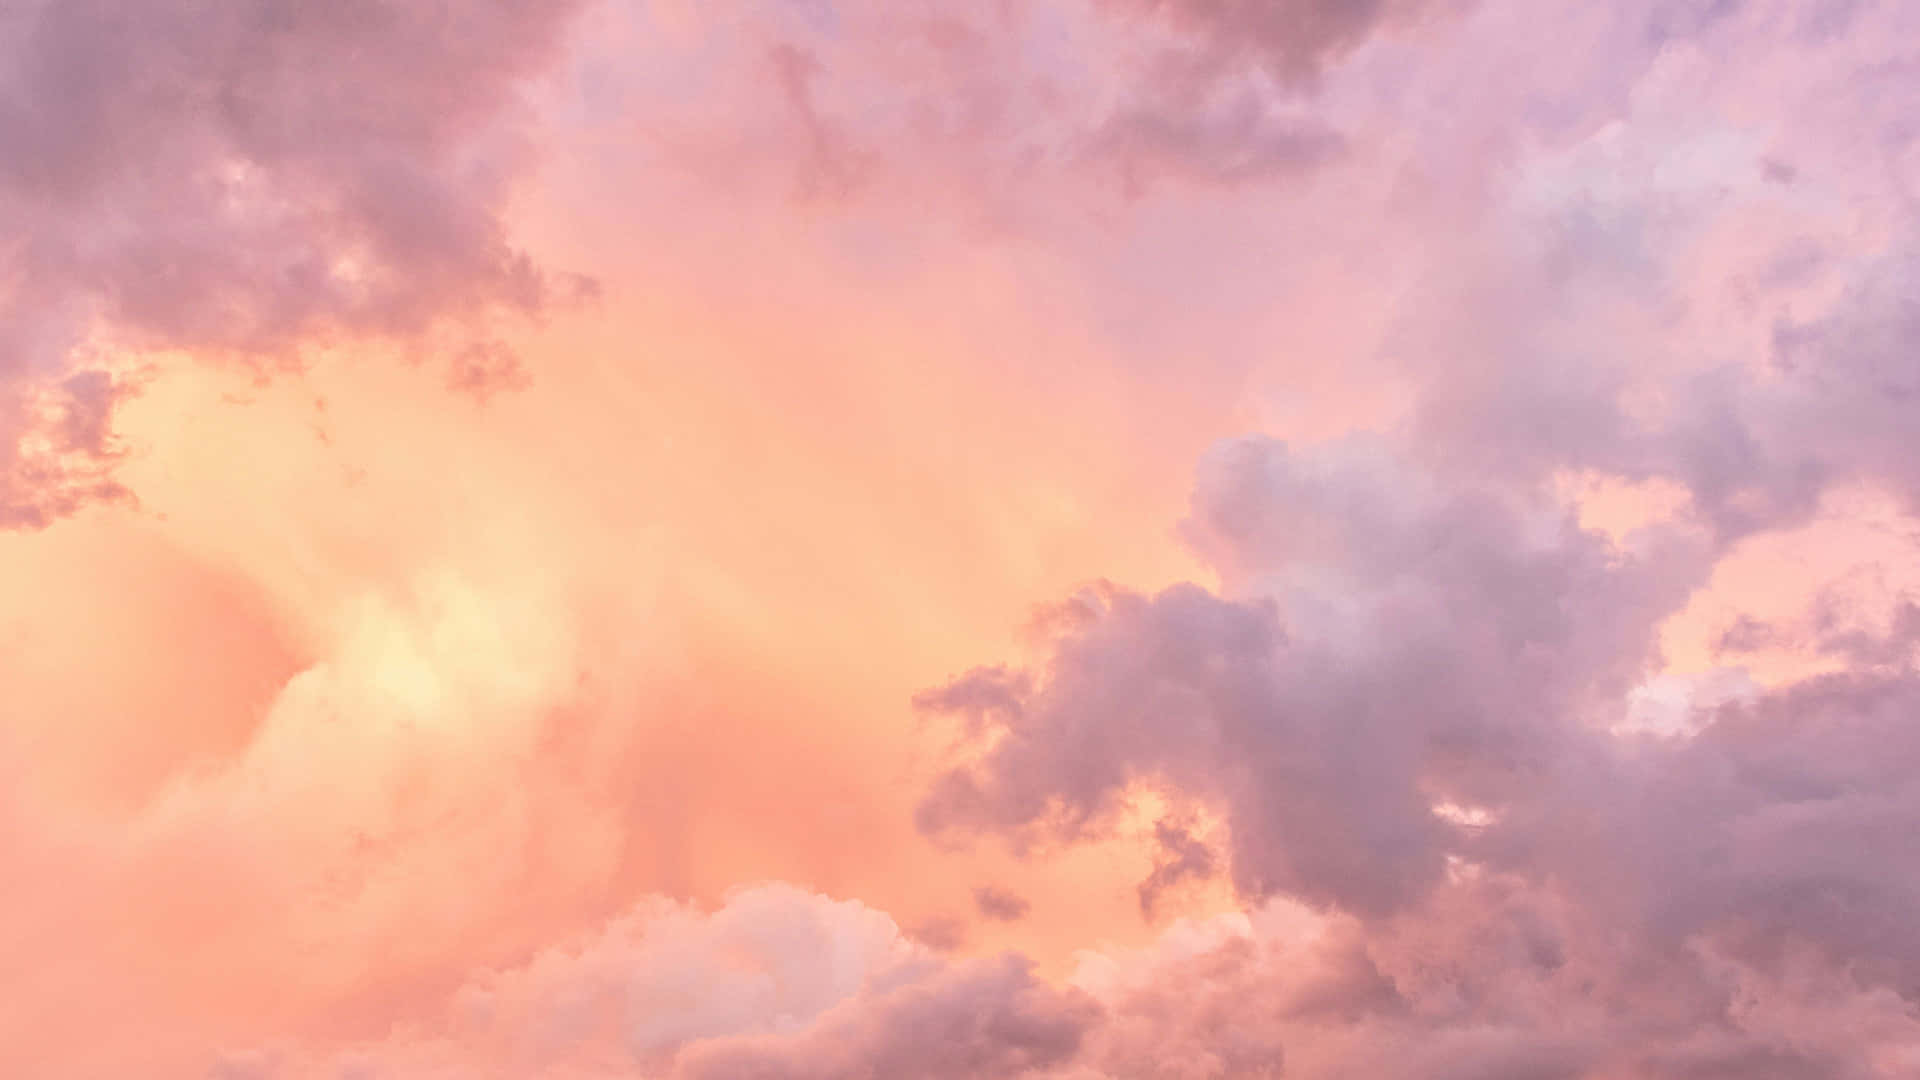 Aesthetic Cloudscape: A Symphony of Serenity